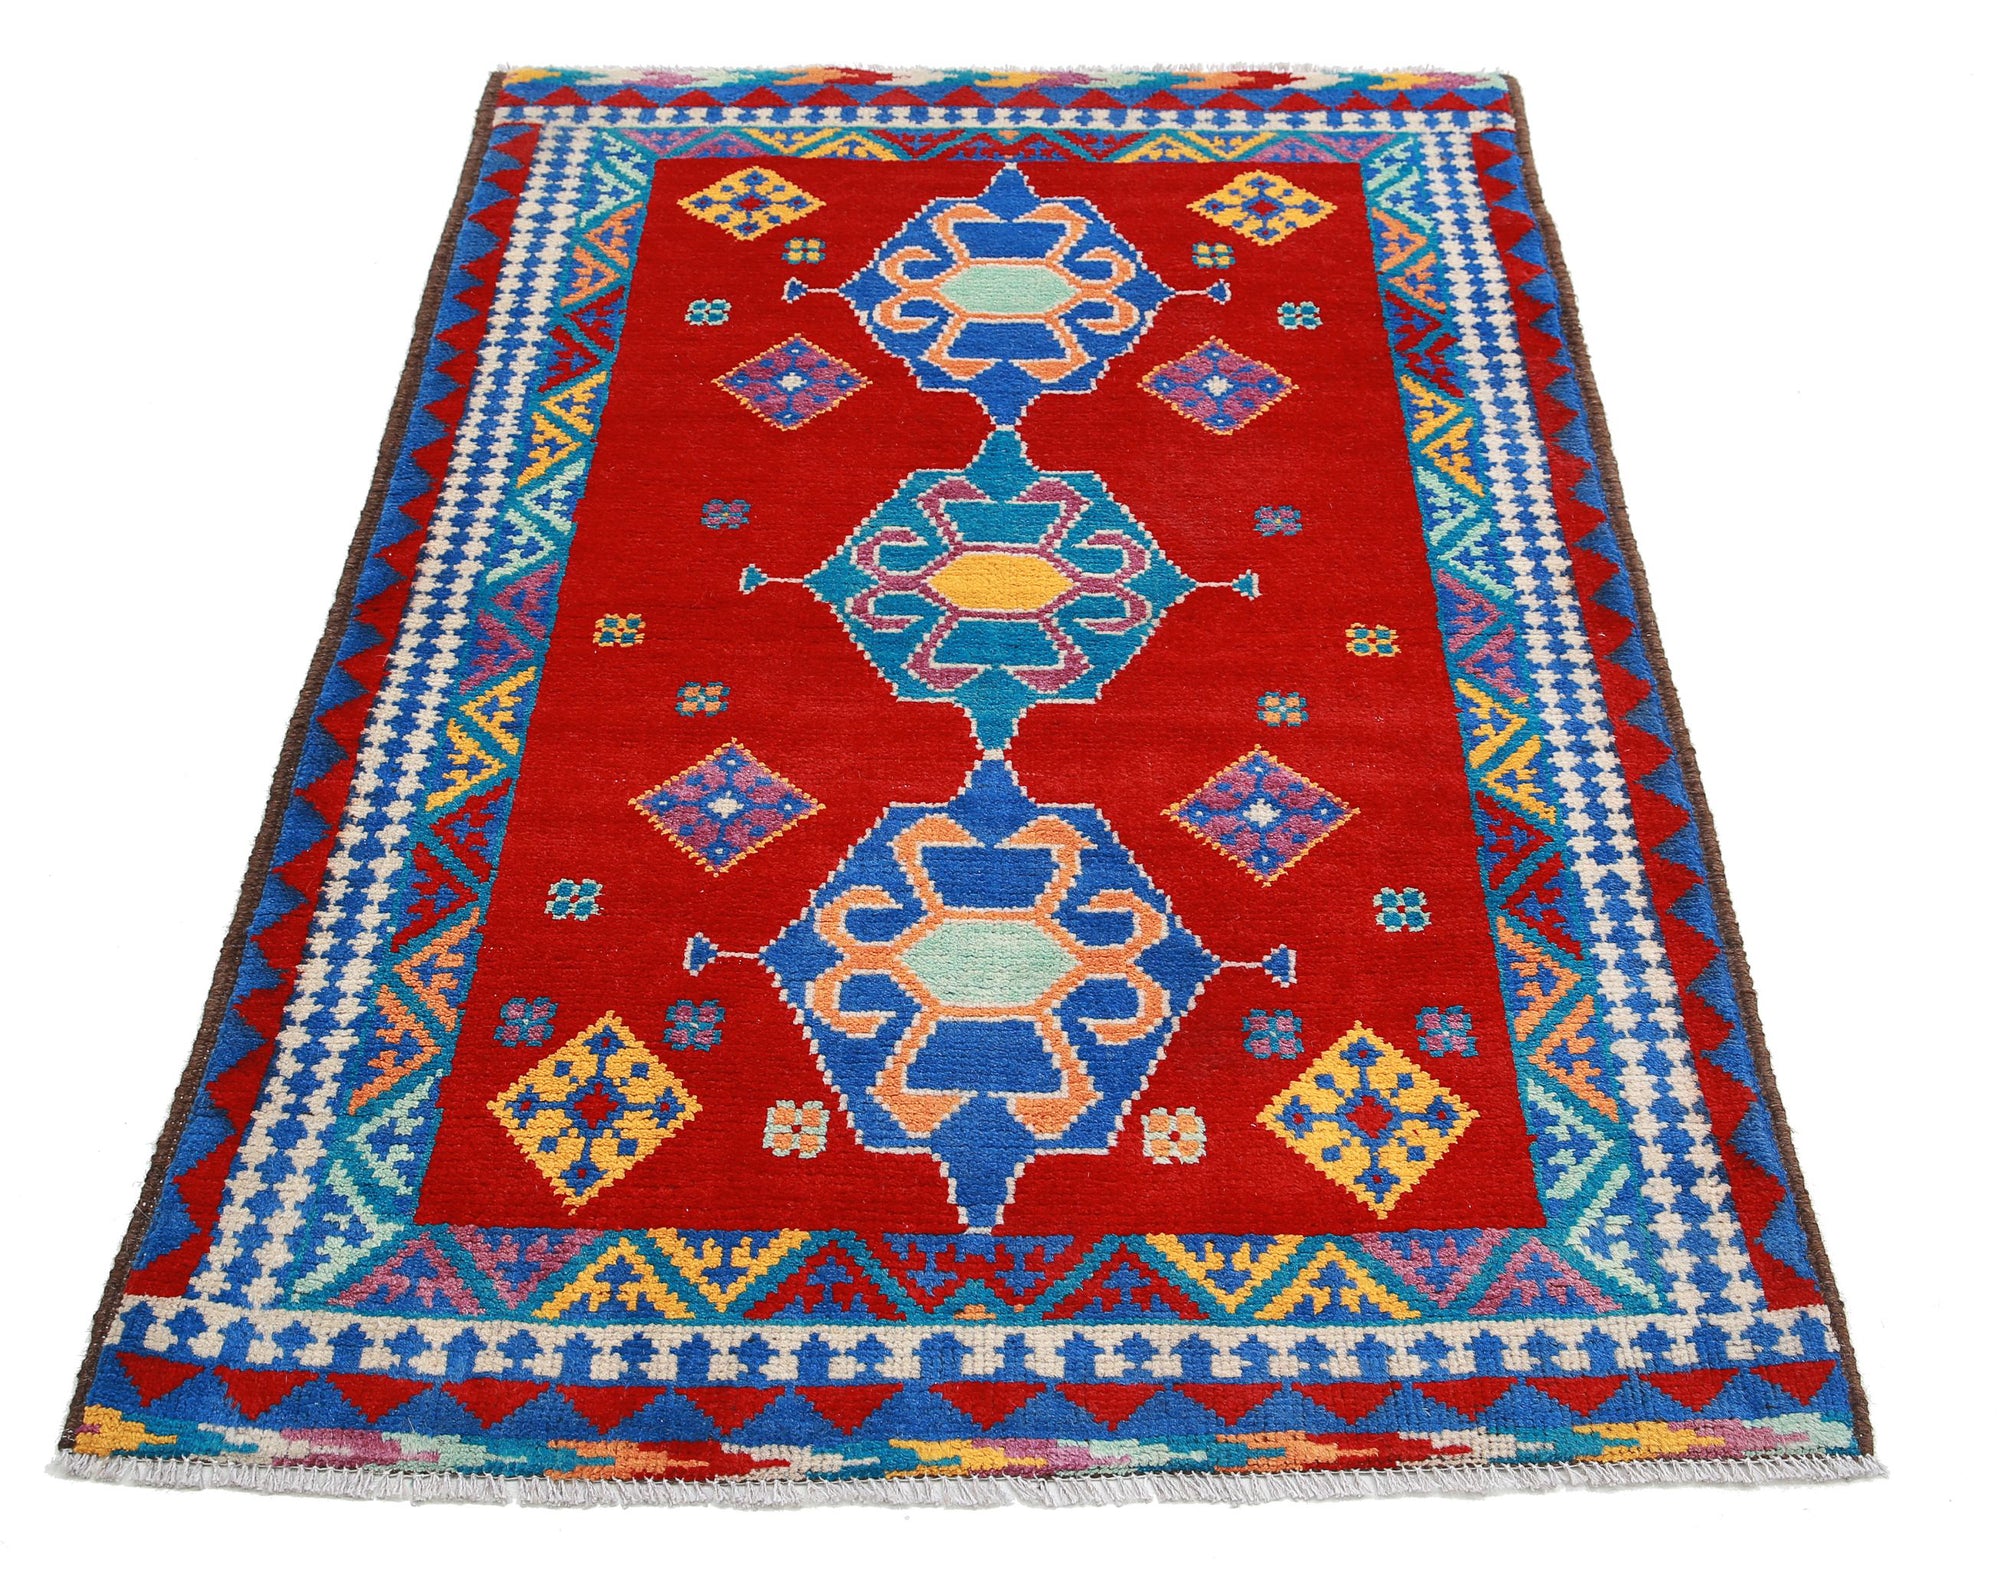 Revival-hand-knotted-qarghani-wool-rug-5014205-3.jpg